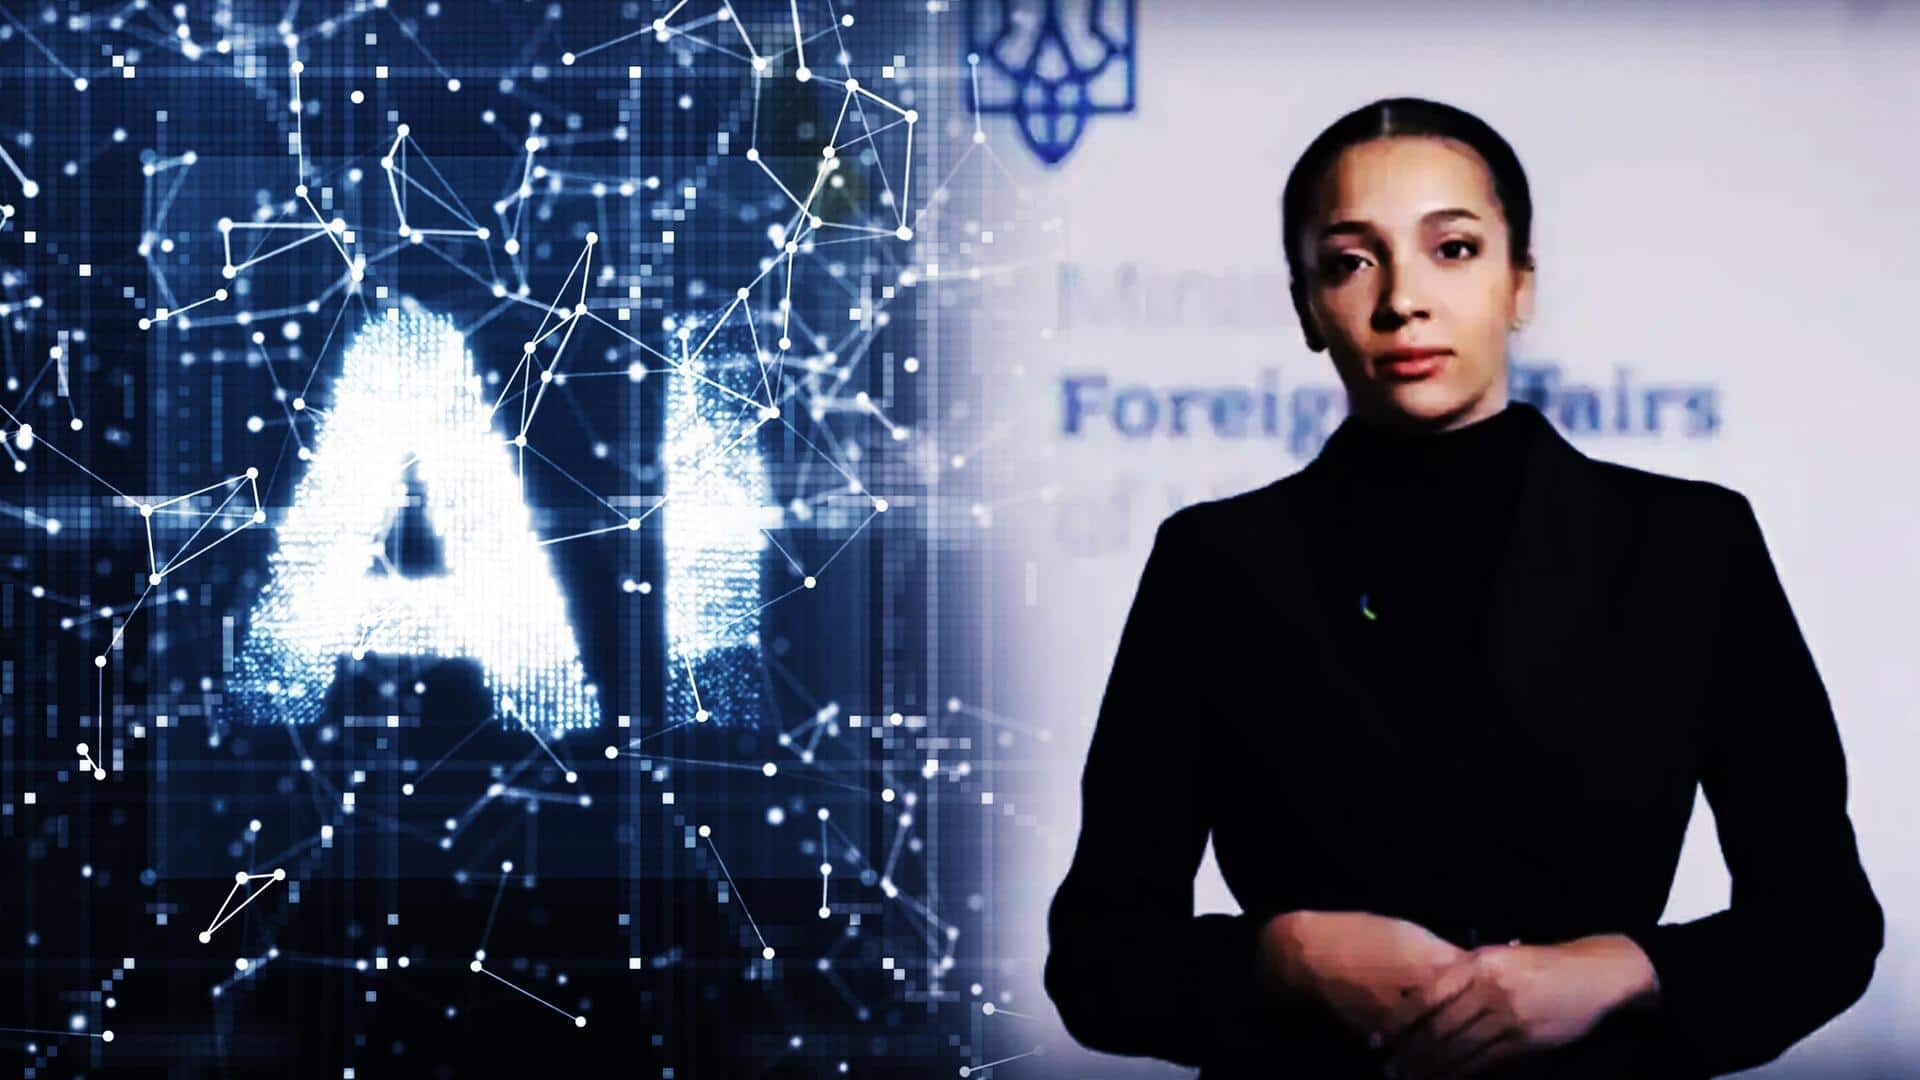 Ukraine introduces AI-generated spokesperson for foreign ministry